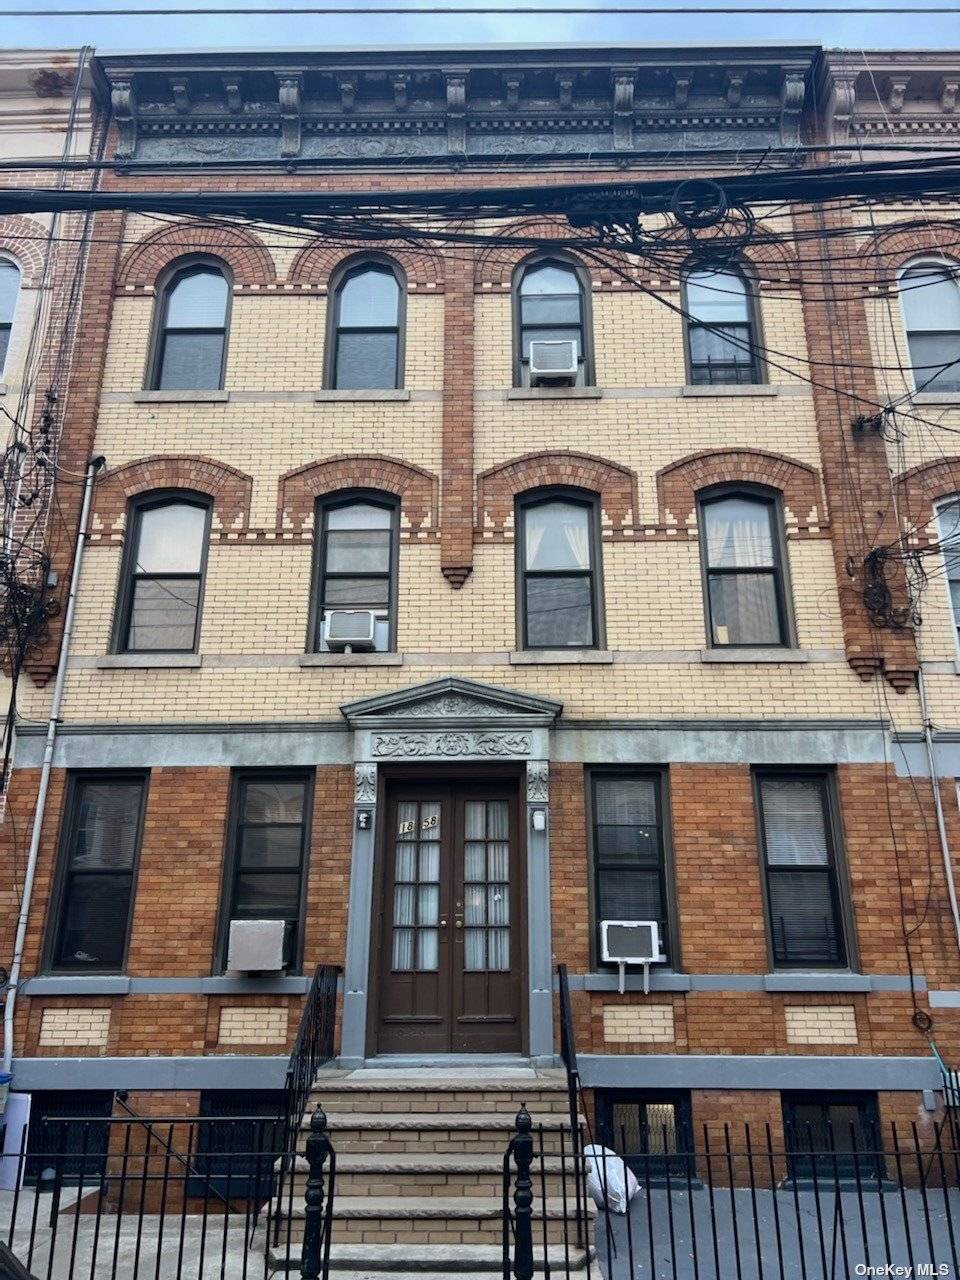 Premier Opportunity To Purchase THREE STORY SOLID BRICK 6 FAMILY PROPERTY IN RIDGEWOOD.